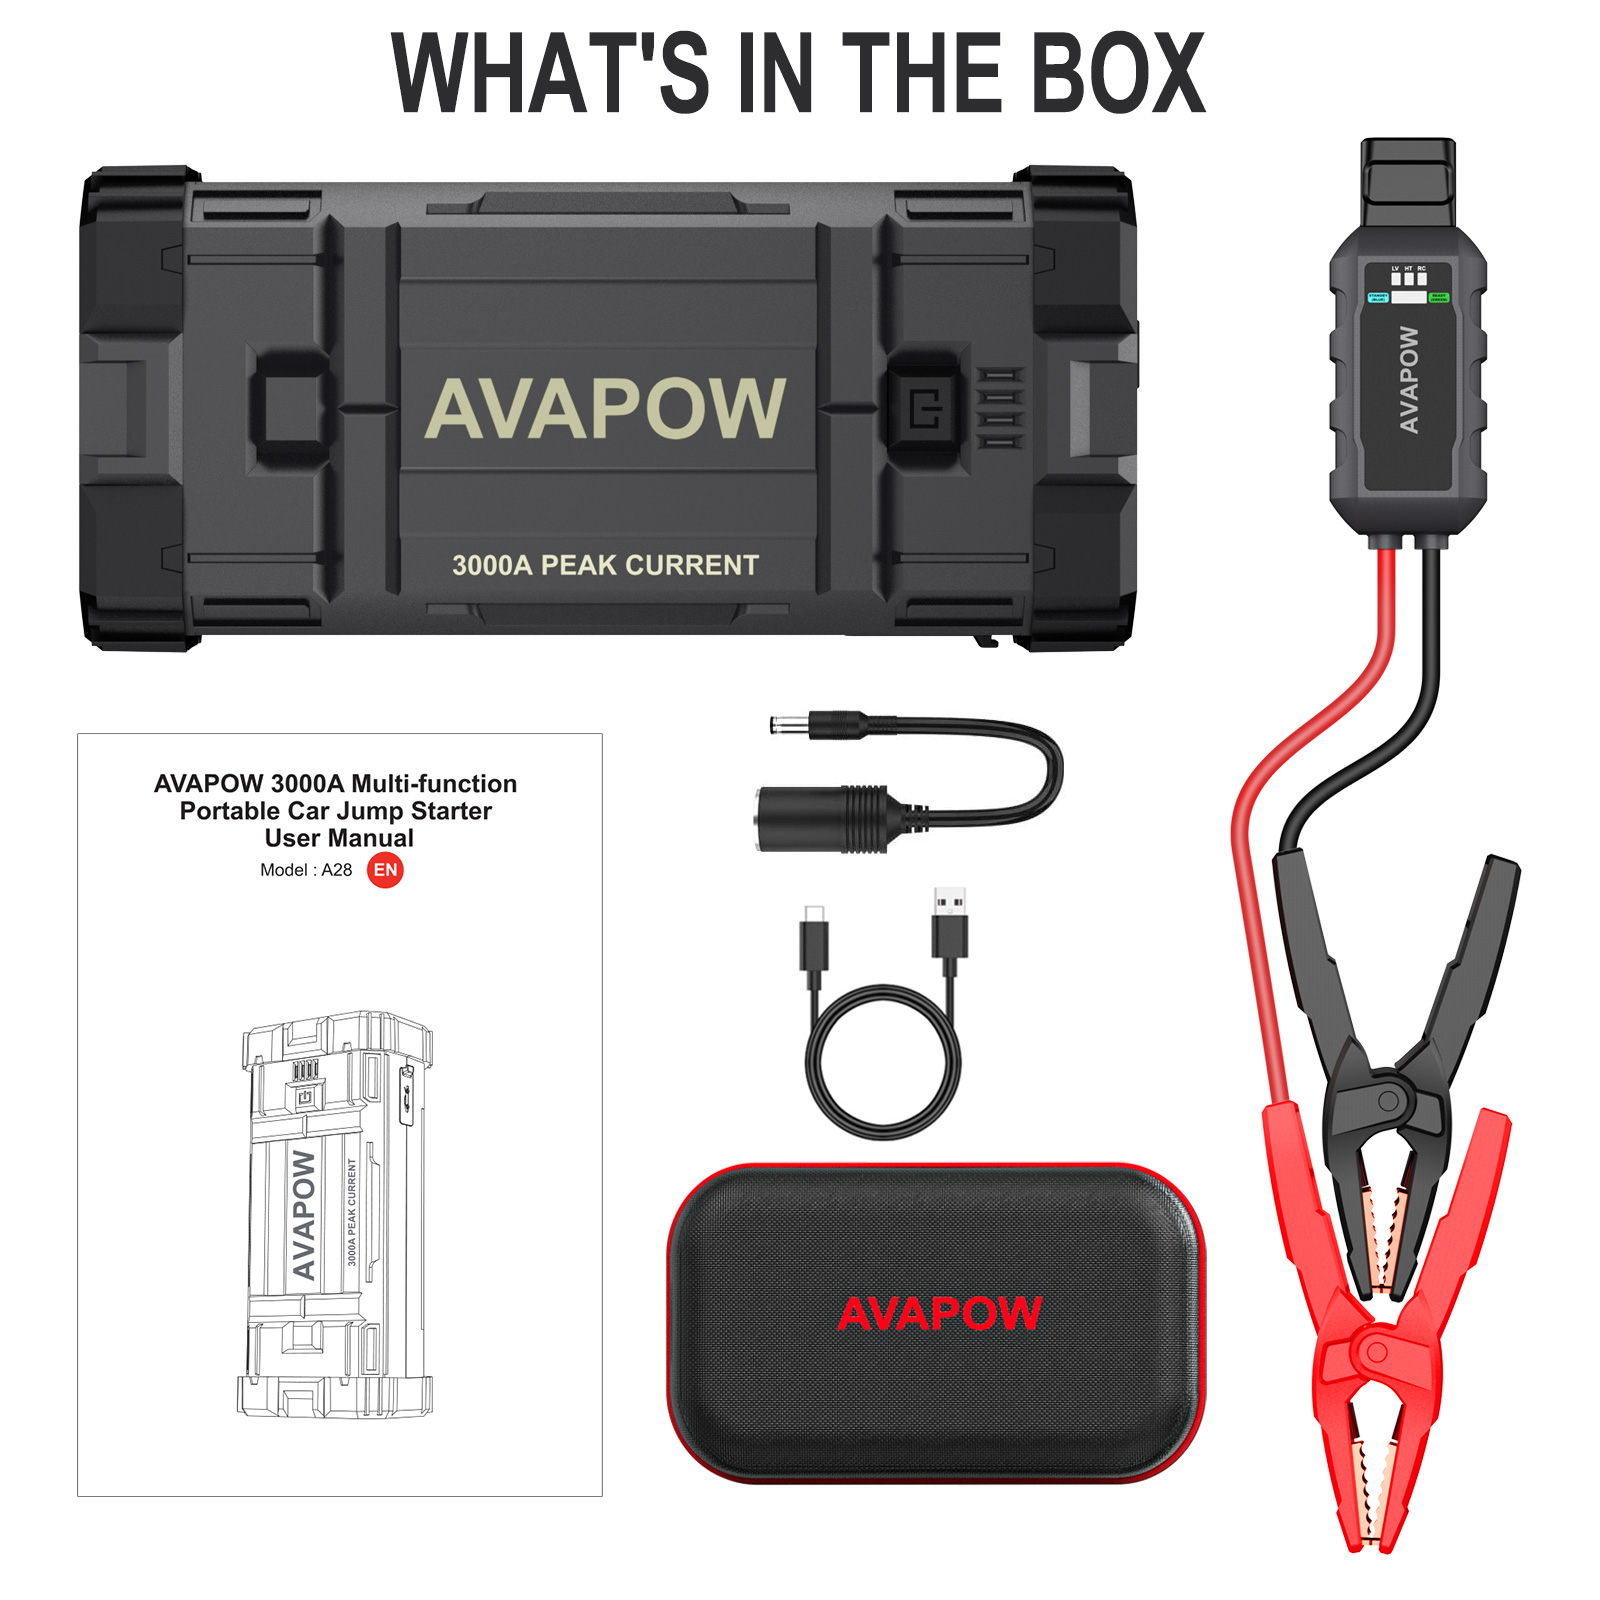 AVAPOW Car Battery Jump Starter ,3000A Peak Portable Jump Starters for Up to 8L Gas 8L Diesel Engine with Booster Function,12V Lithium Jump Charger Pack Box with Smart Safety Clamp - image 3 of 8